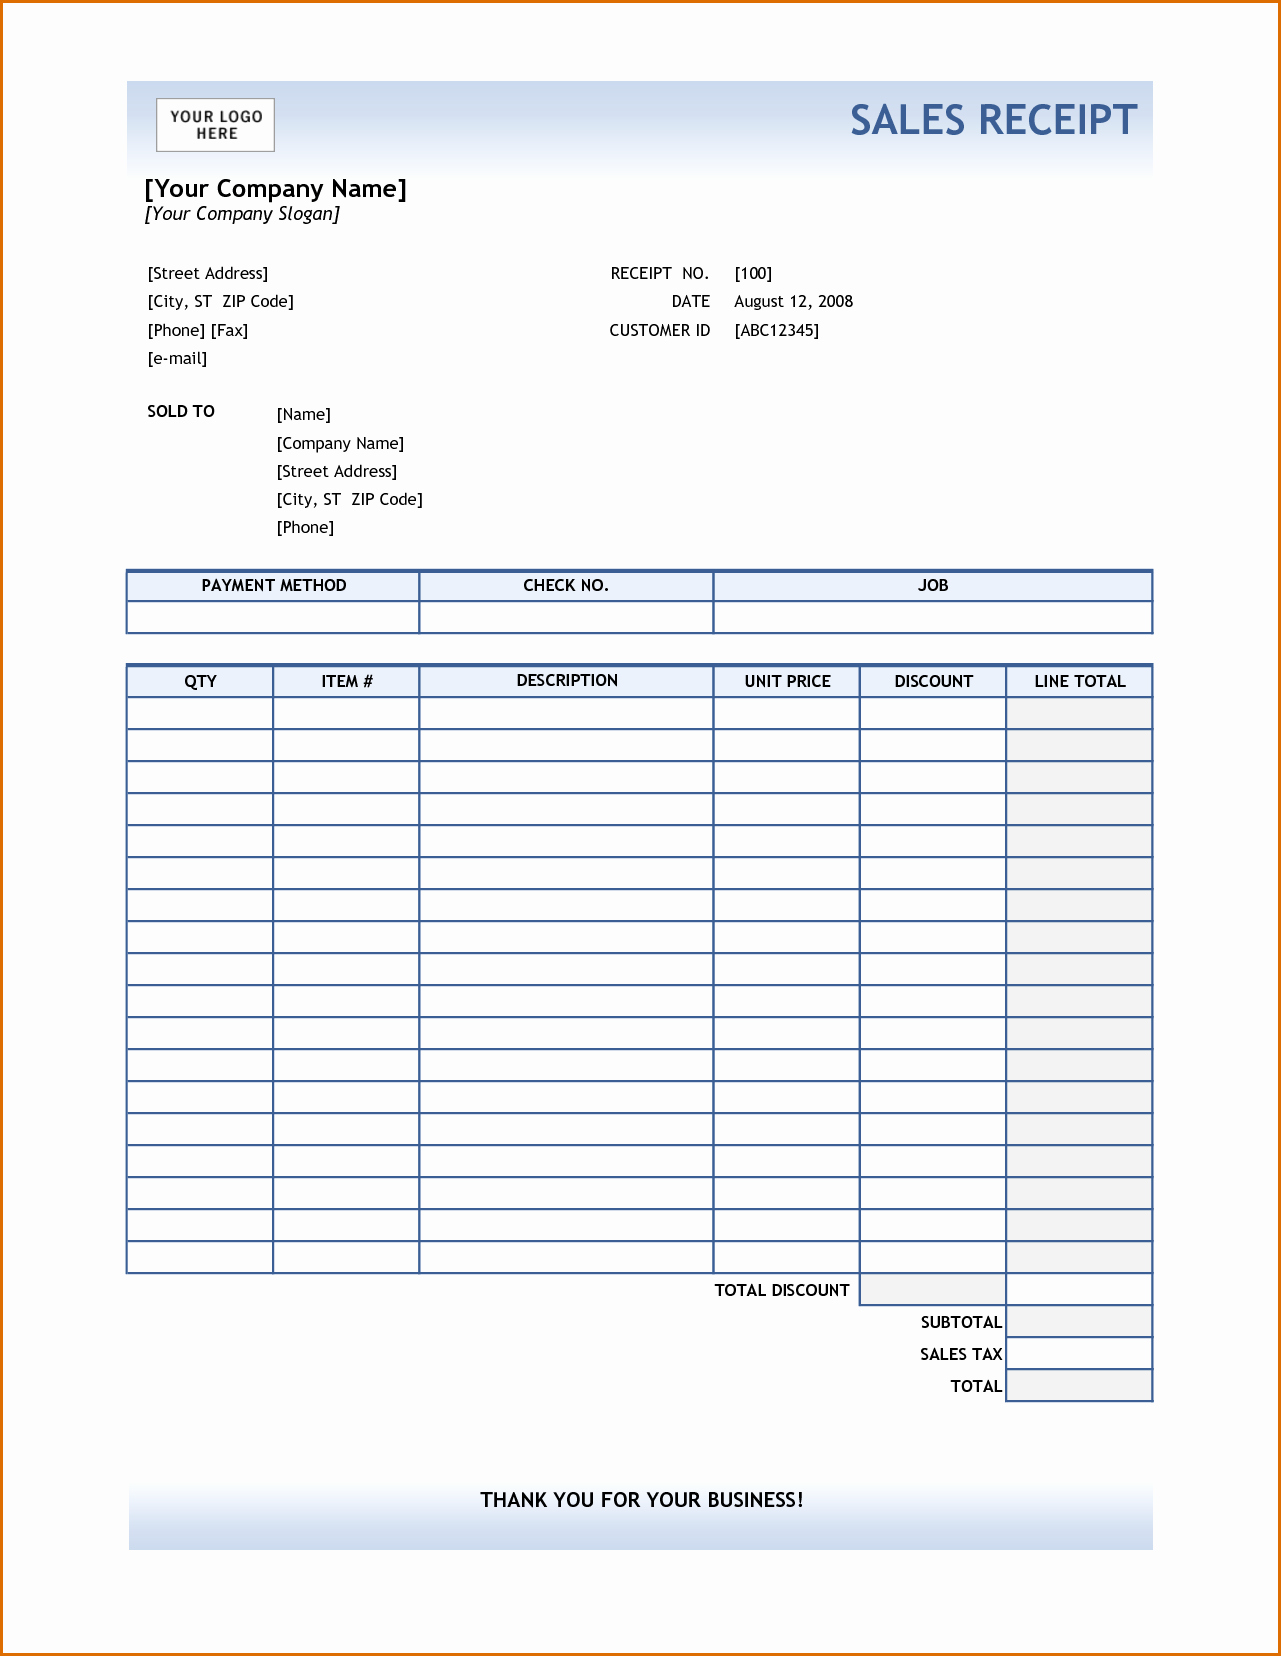 Sales Receipt Template Excel Awesome 4 Excel Receipt Template